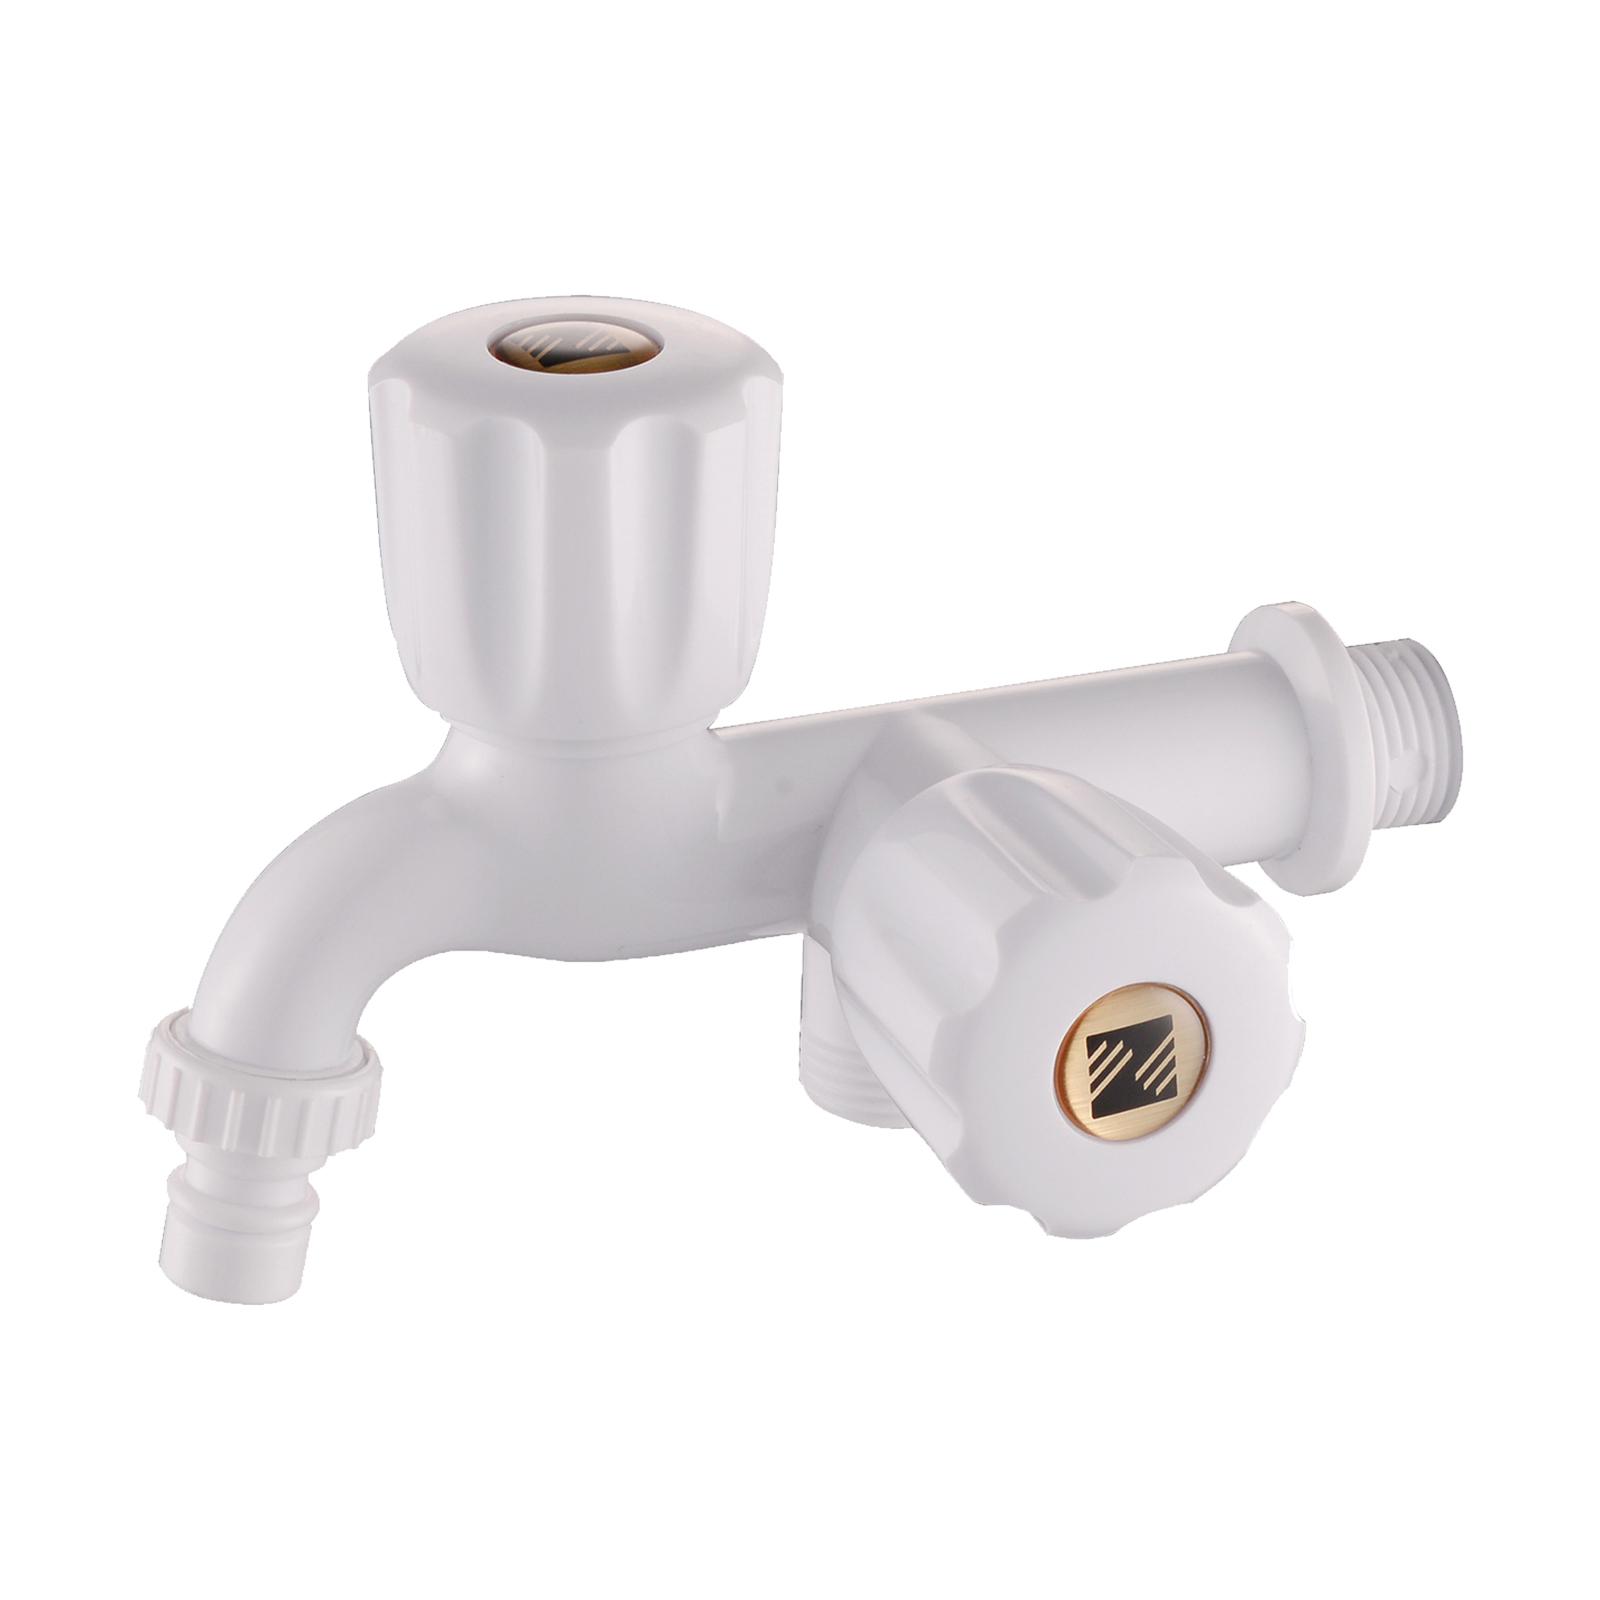 Washing Machine Water Faucet Outlet Valve Garden Tap for Home Garden Style B